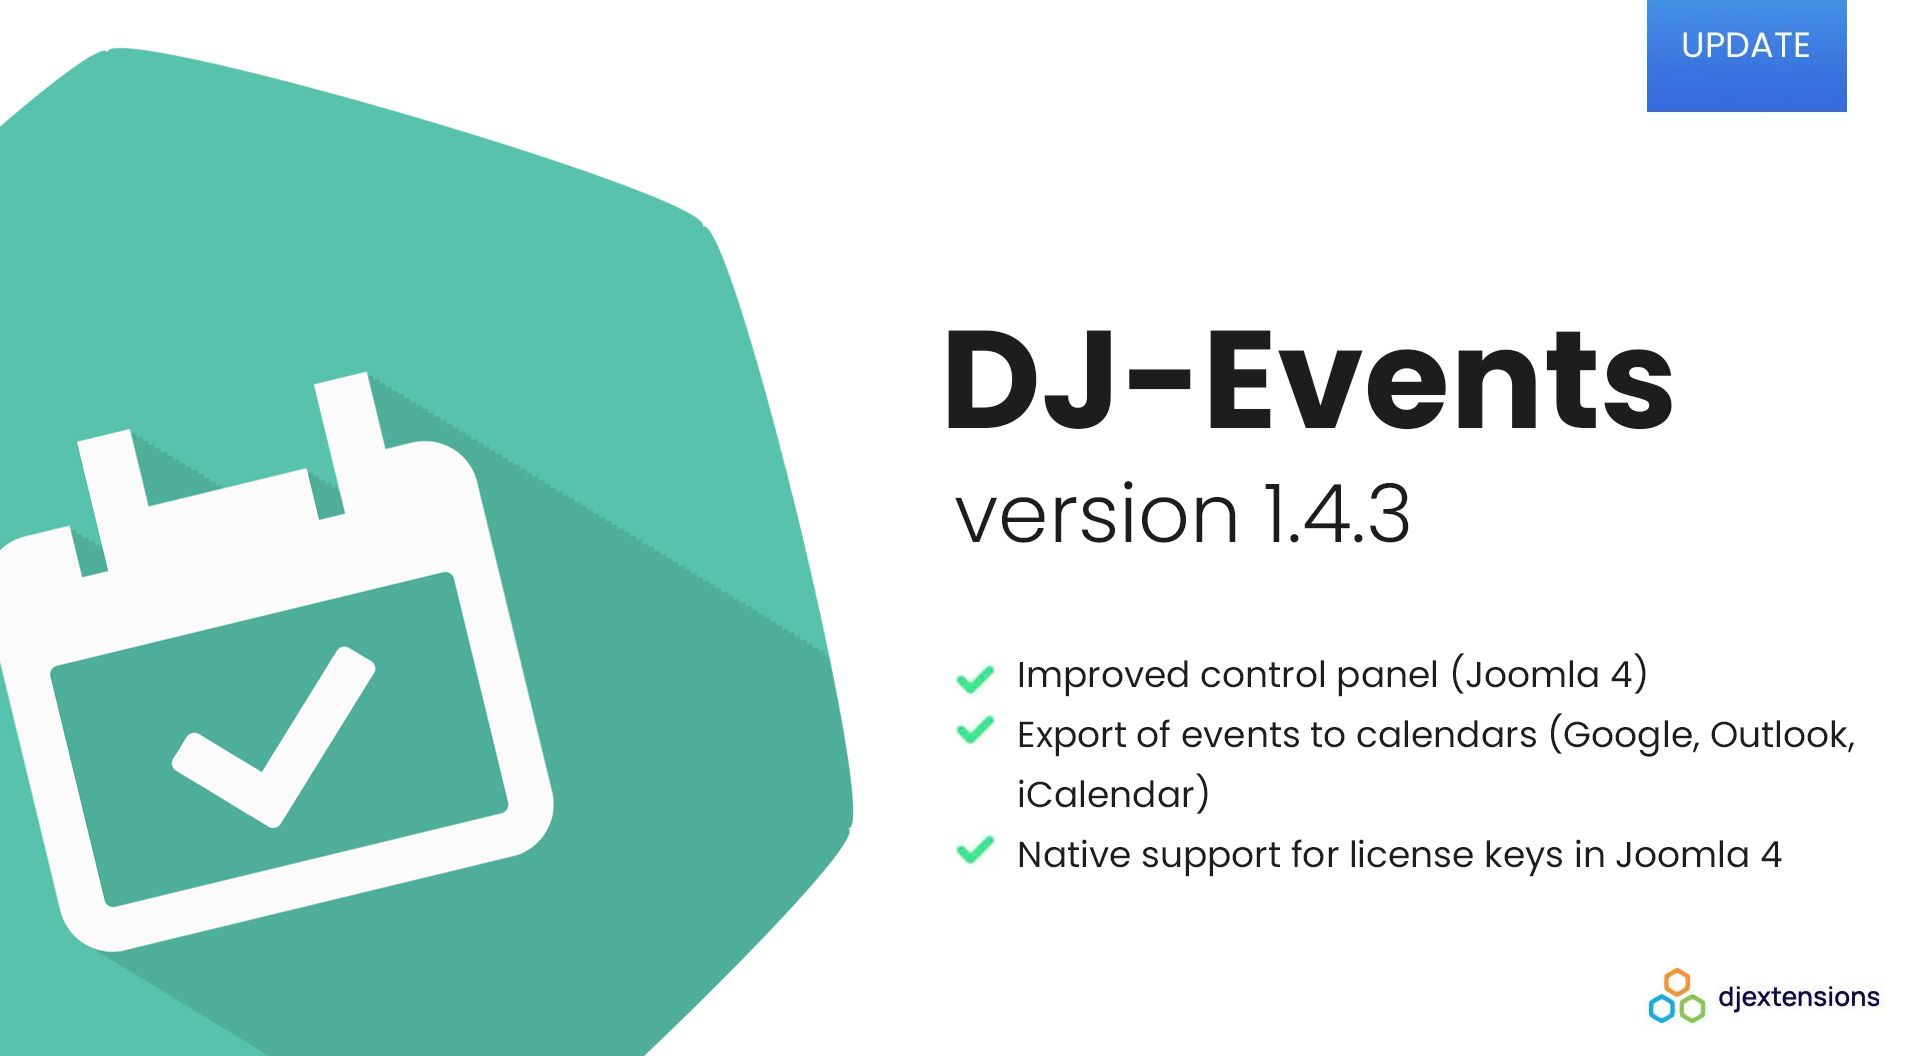 DJ-Events extension update brings the export of events to calendars feature!